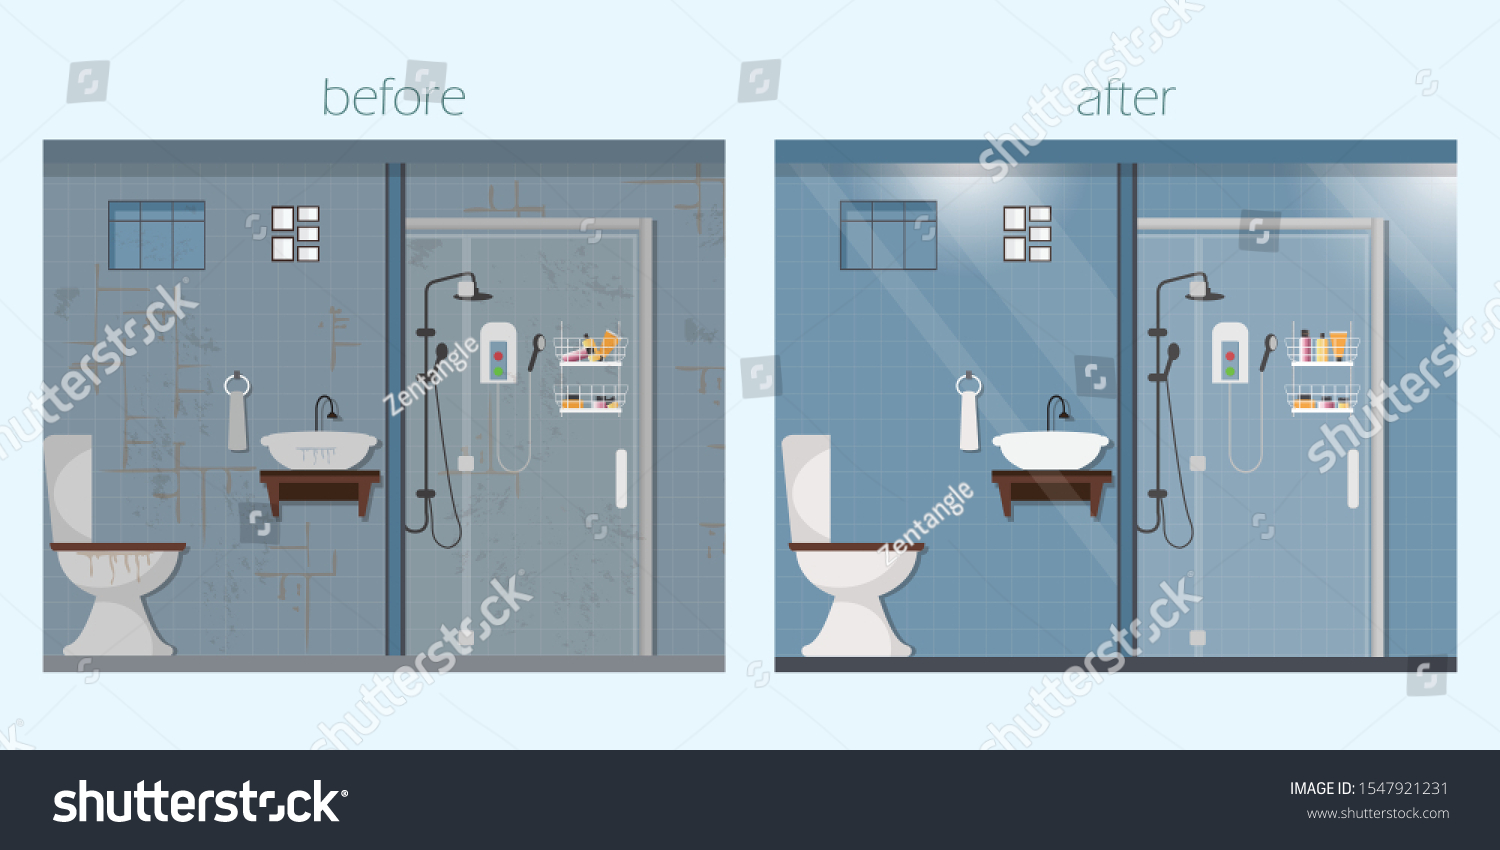 SVG of Clean and dirty bathroom interior with furniture, toilet sink bath and accessories in a modern style. Flat vector illustration. svg